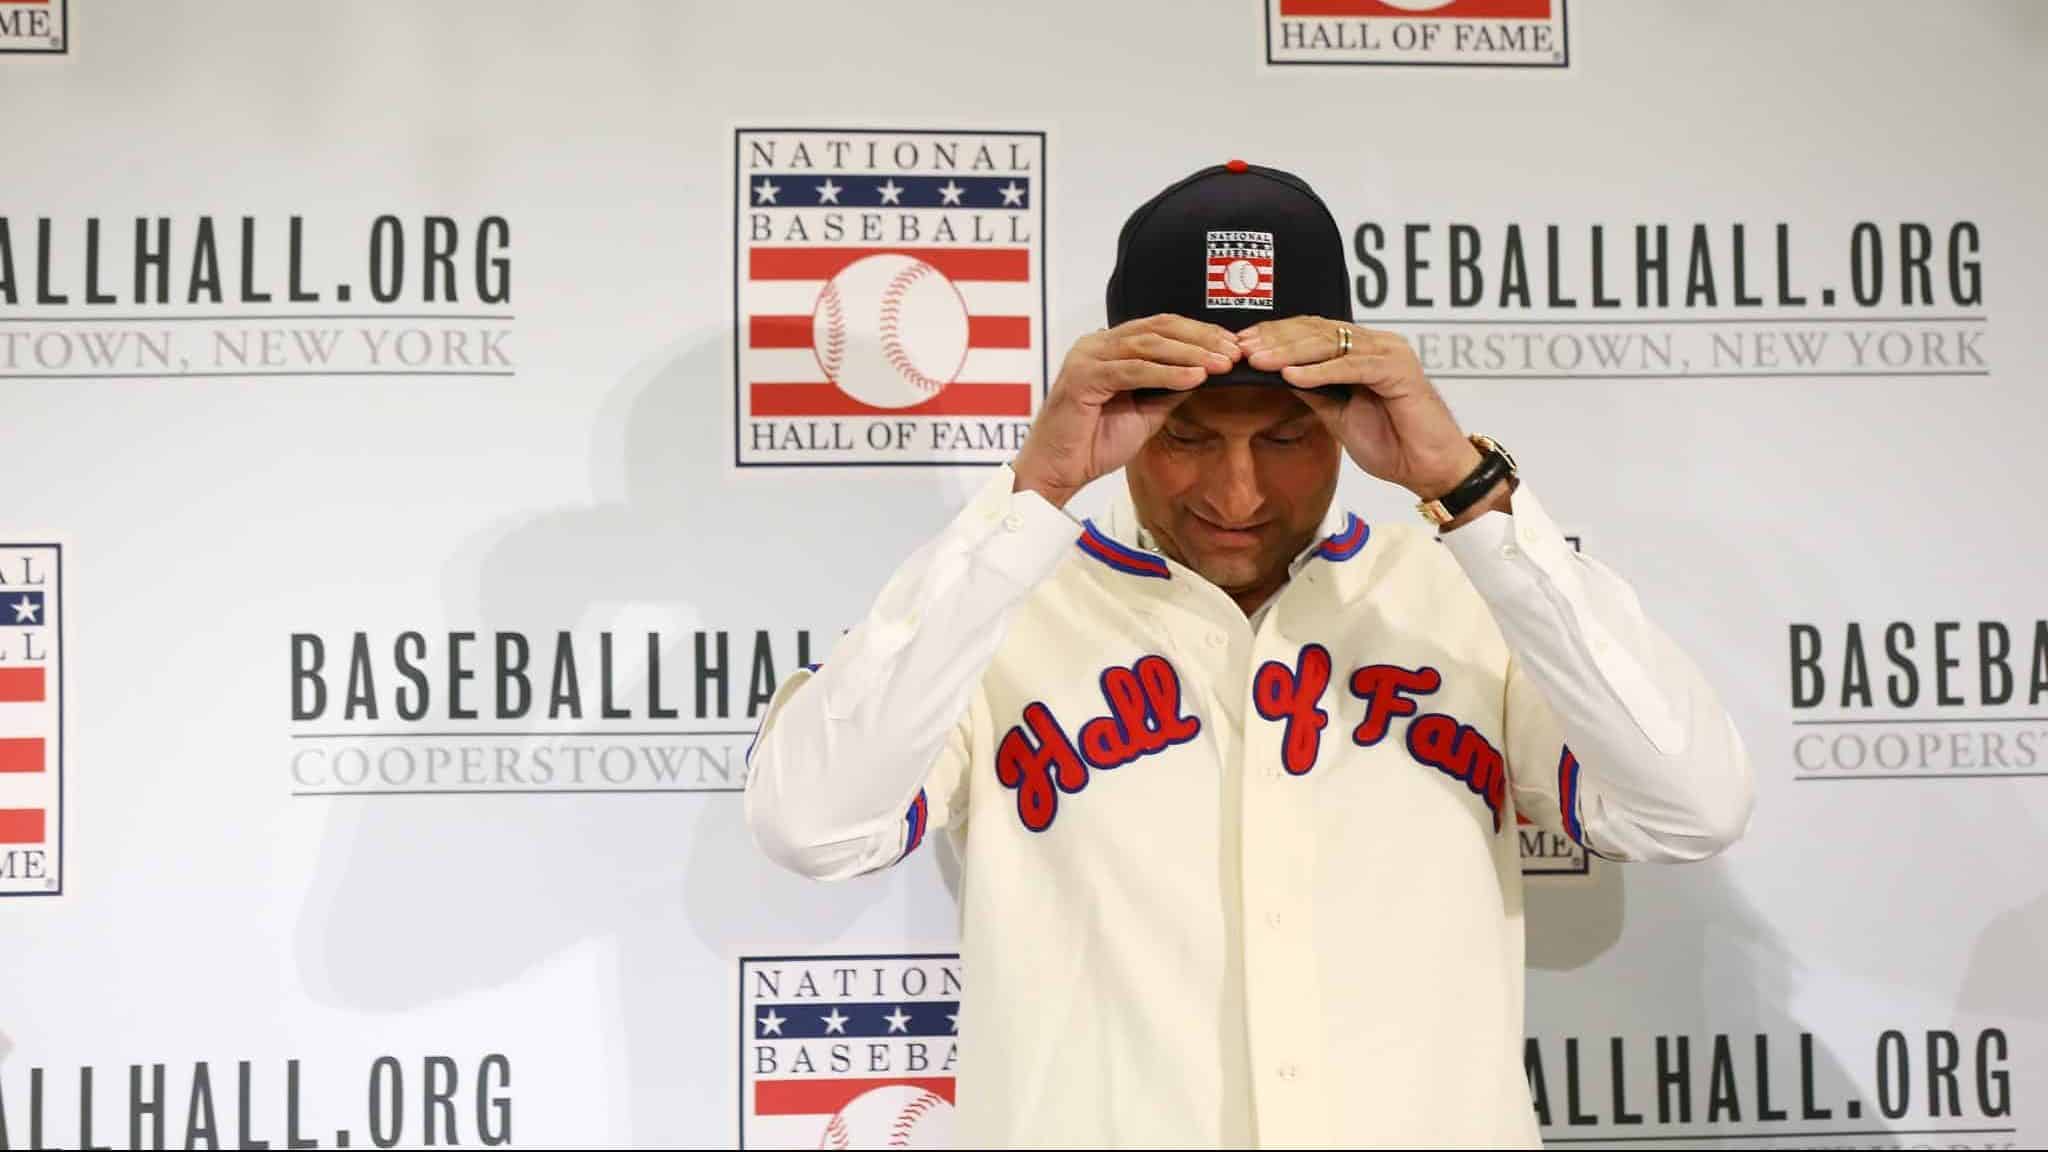 NEW YORK, NEW YORK - JANUARY 22: Derek Jeter puts on his Hall of Fame hat after being elected into the National Baseball Hall of Fame Class of 2020 on January 22, 2020 at the St. Regis Hotel in New York City. The National Baseball Hall of Fame induction ceremony will be held on Sunday, July 26, 2020 in Cooperstown, NY.